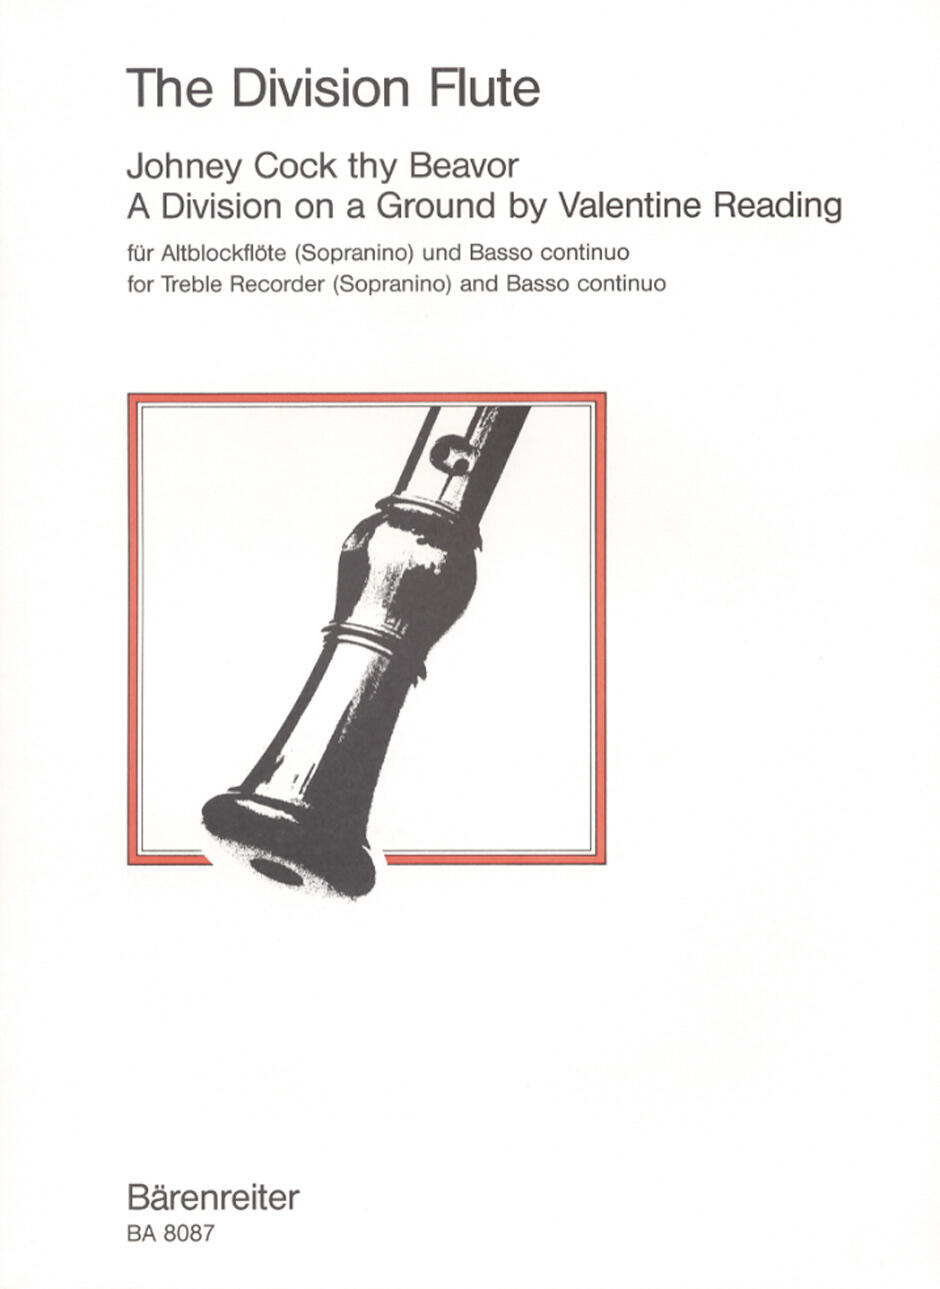 The Division Flute Recorder and Continuo / Johney Cock thy Beavor - A Division on a Ground by Valentine Reading : photo 1